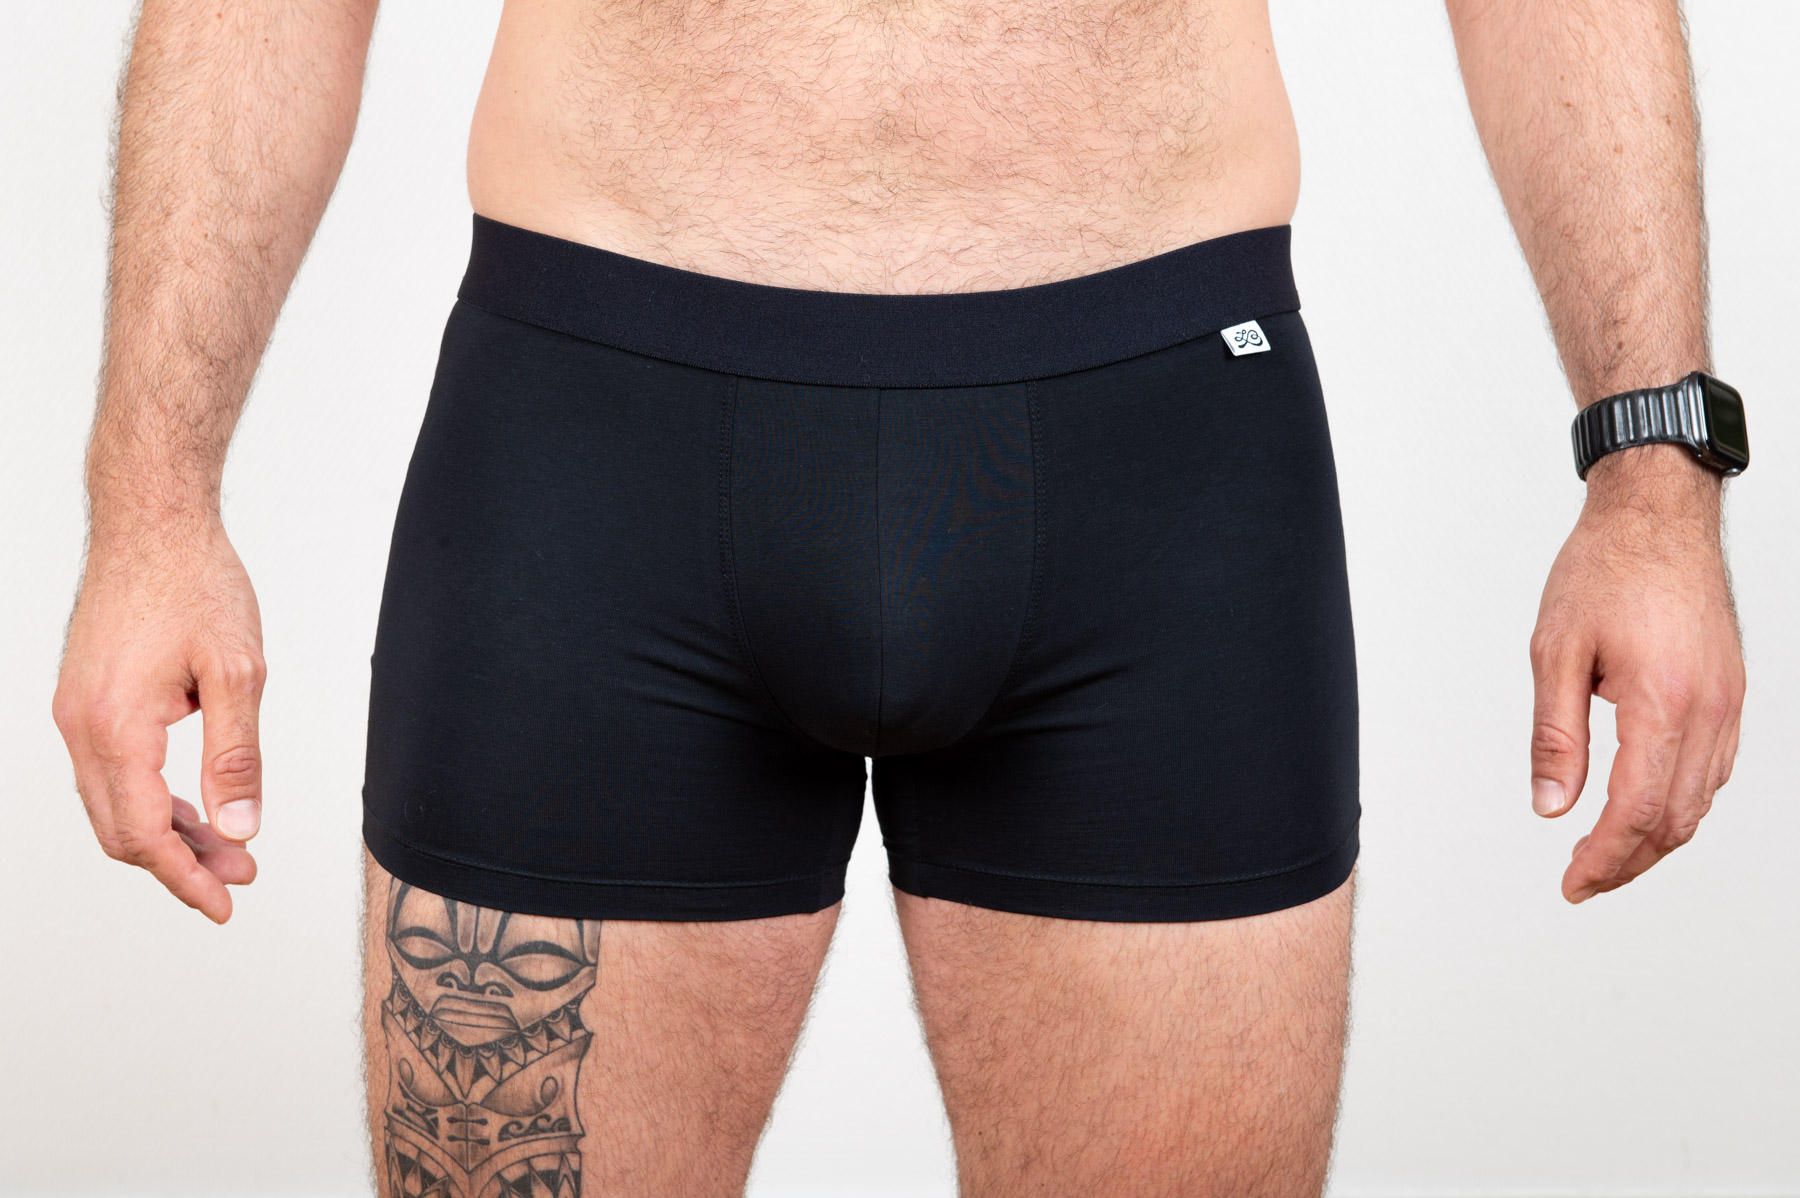 Her Royal Harness Boxer Brief – The Love Store Online